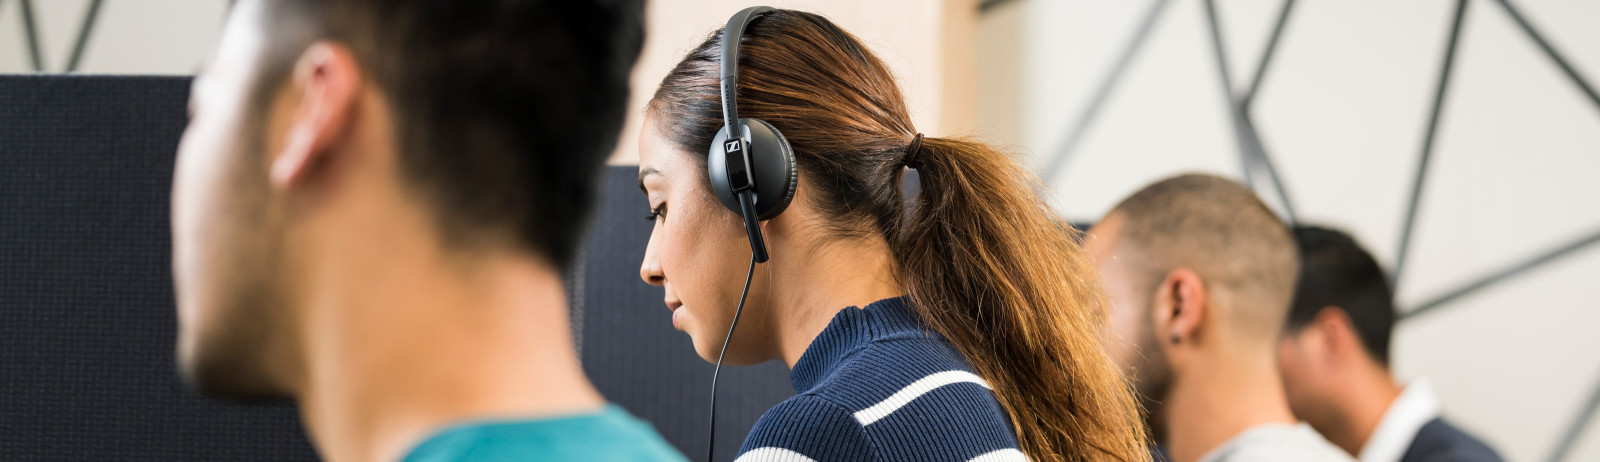 Female test taker in navy blue t-shirt listens to an audio in the Listening test during an IELTS on computer session